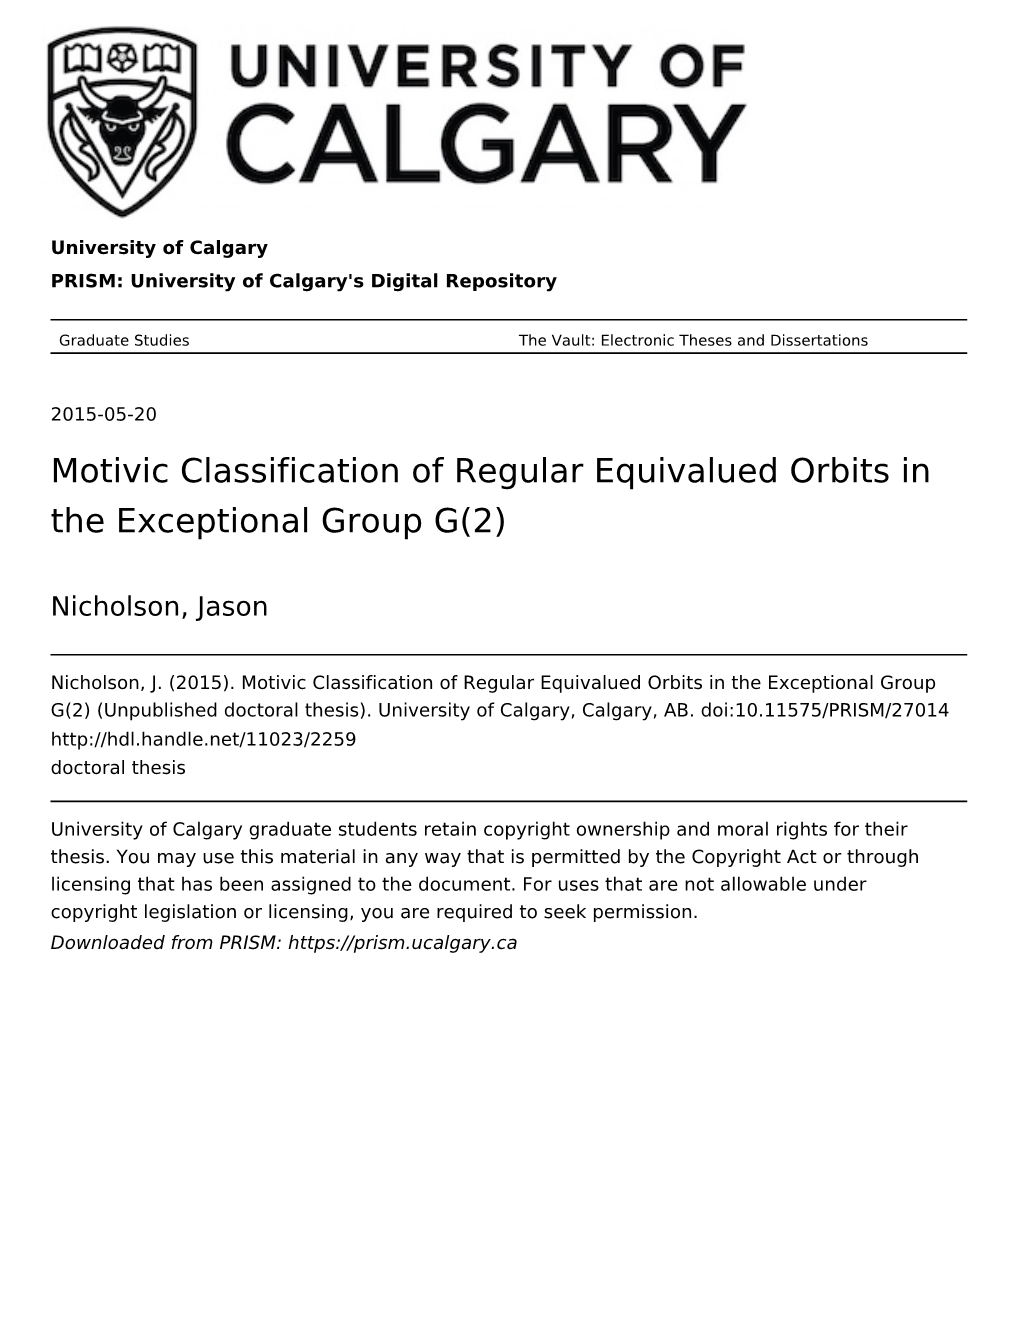 Motivic Classification of Regular Equivalued Orbits in the Exceptional Group G(2)